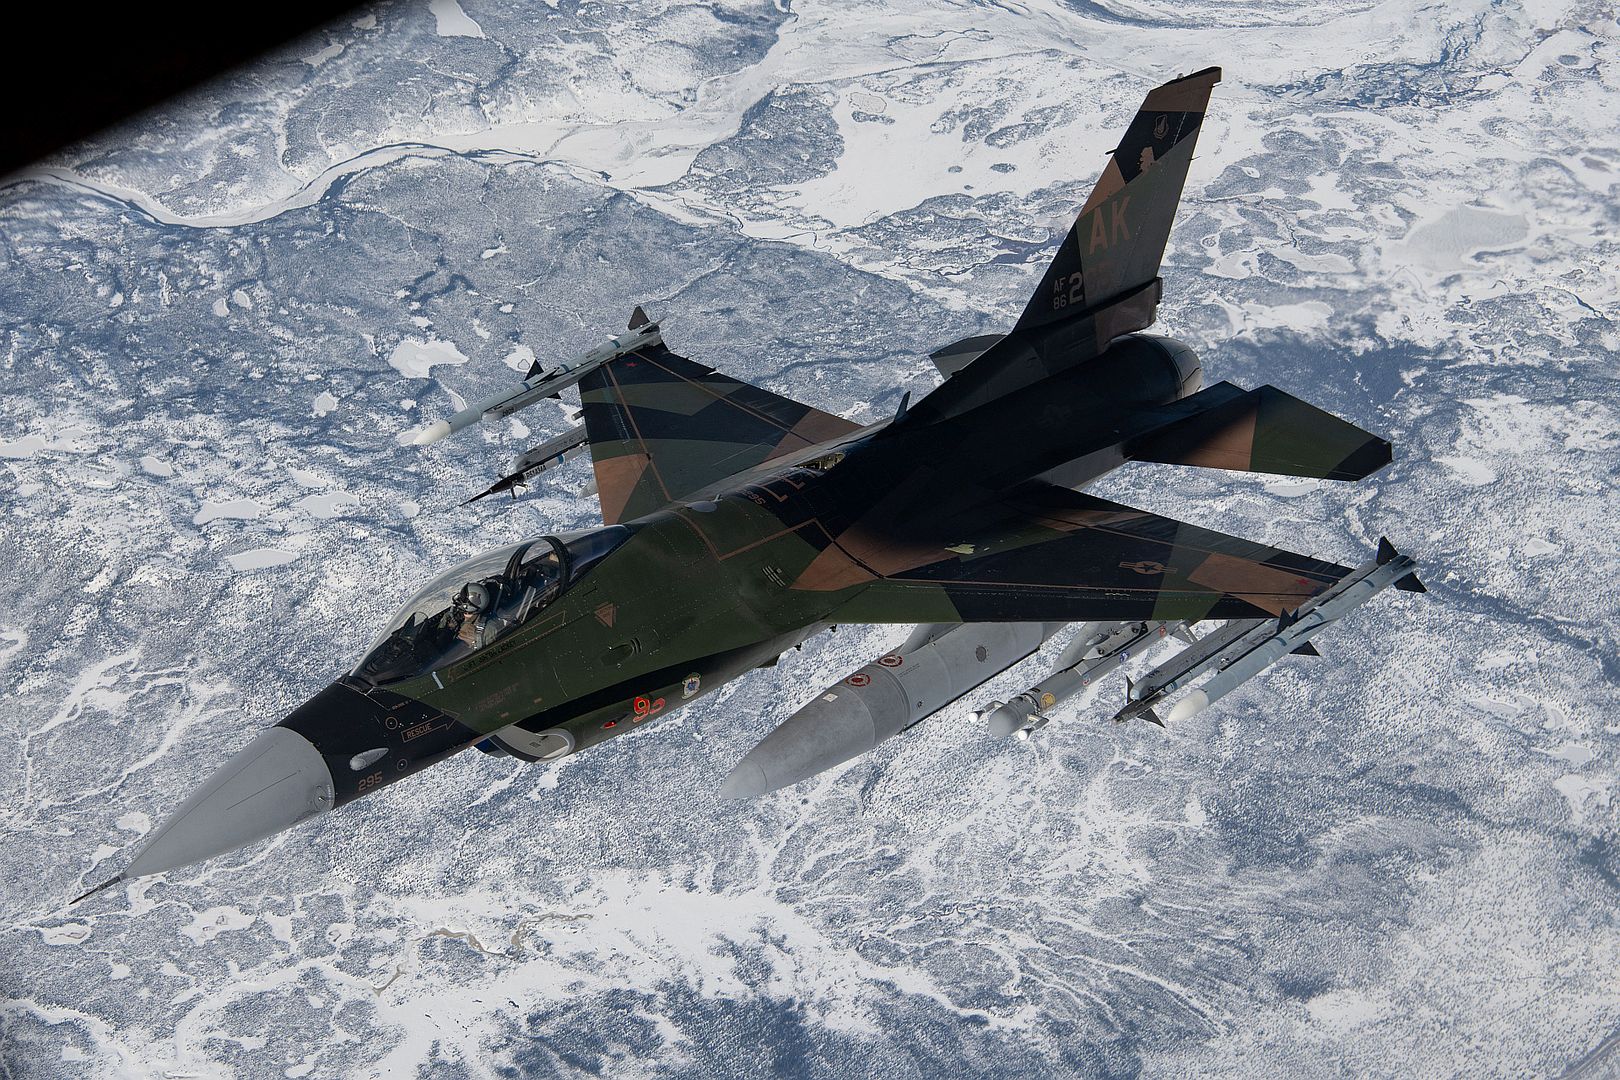 16 Fighting Falcon Assigned To The 18th Aggressor Squadron Eielson Air Force Base Alaska 